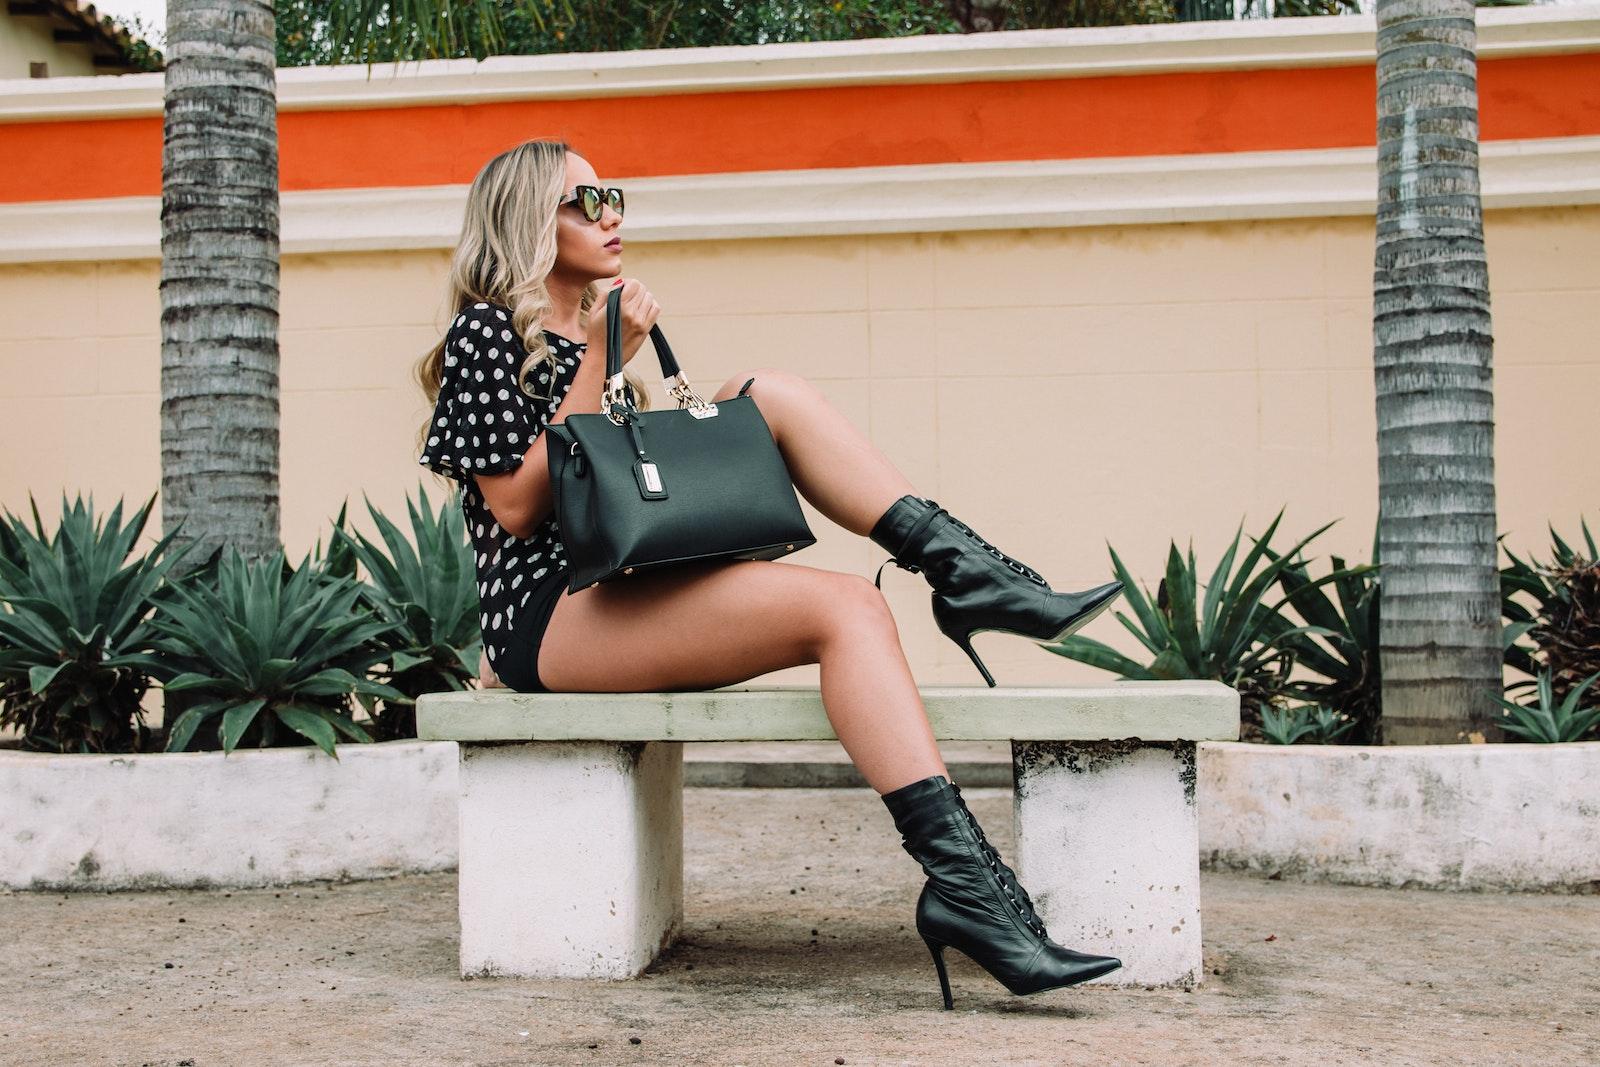 Woman Wearing Black and White Polka-dot Shirt With Black Short Shorts Holding Black Leather Tote Bag Sitting on White Concrete Bench